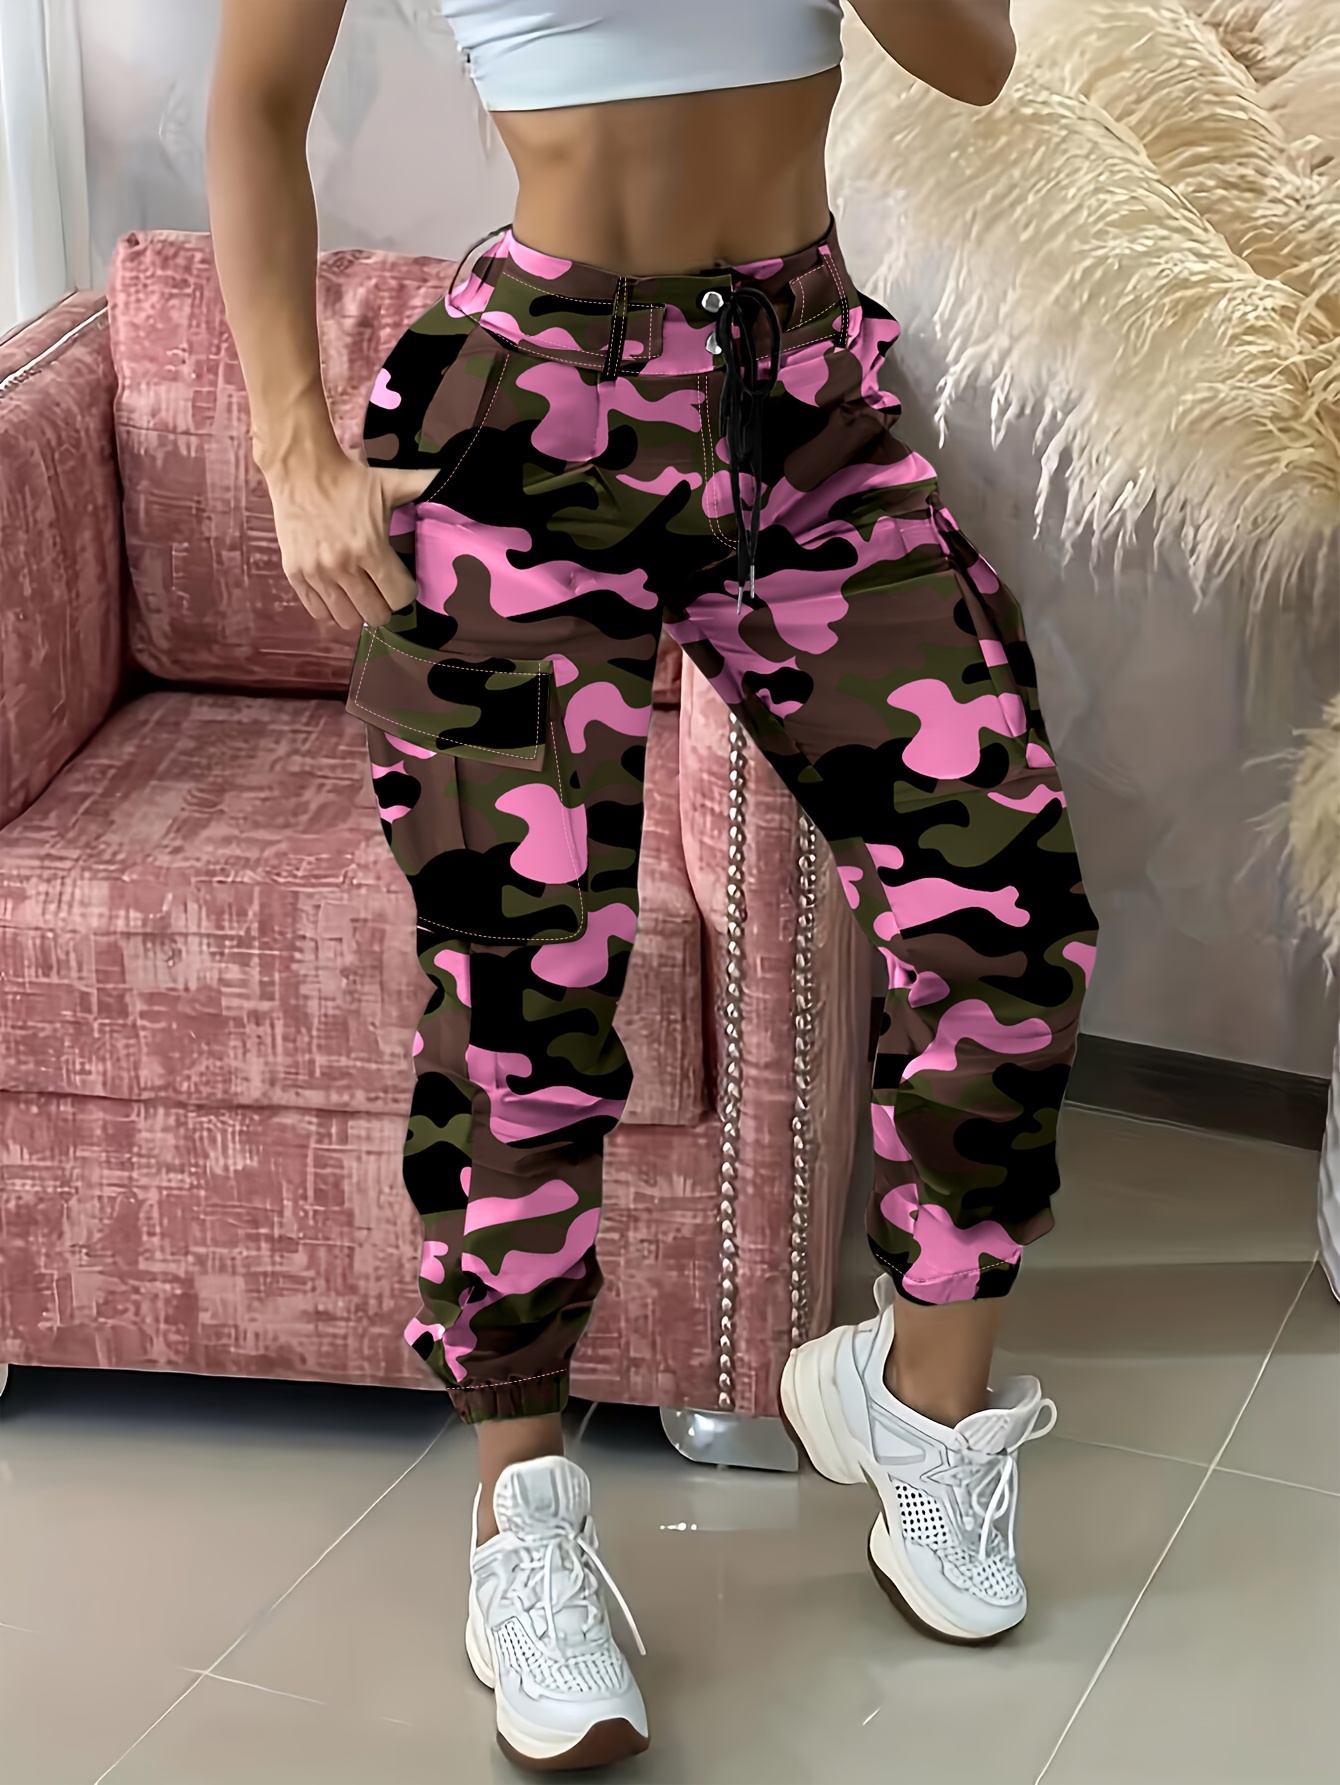 Camo Print Drawstring Baggy Joggers, Casual Hiogh Waist Pants For Spring &  Fall, Women's Clothing